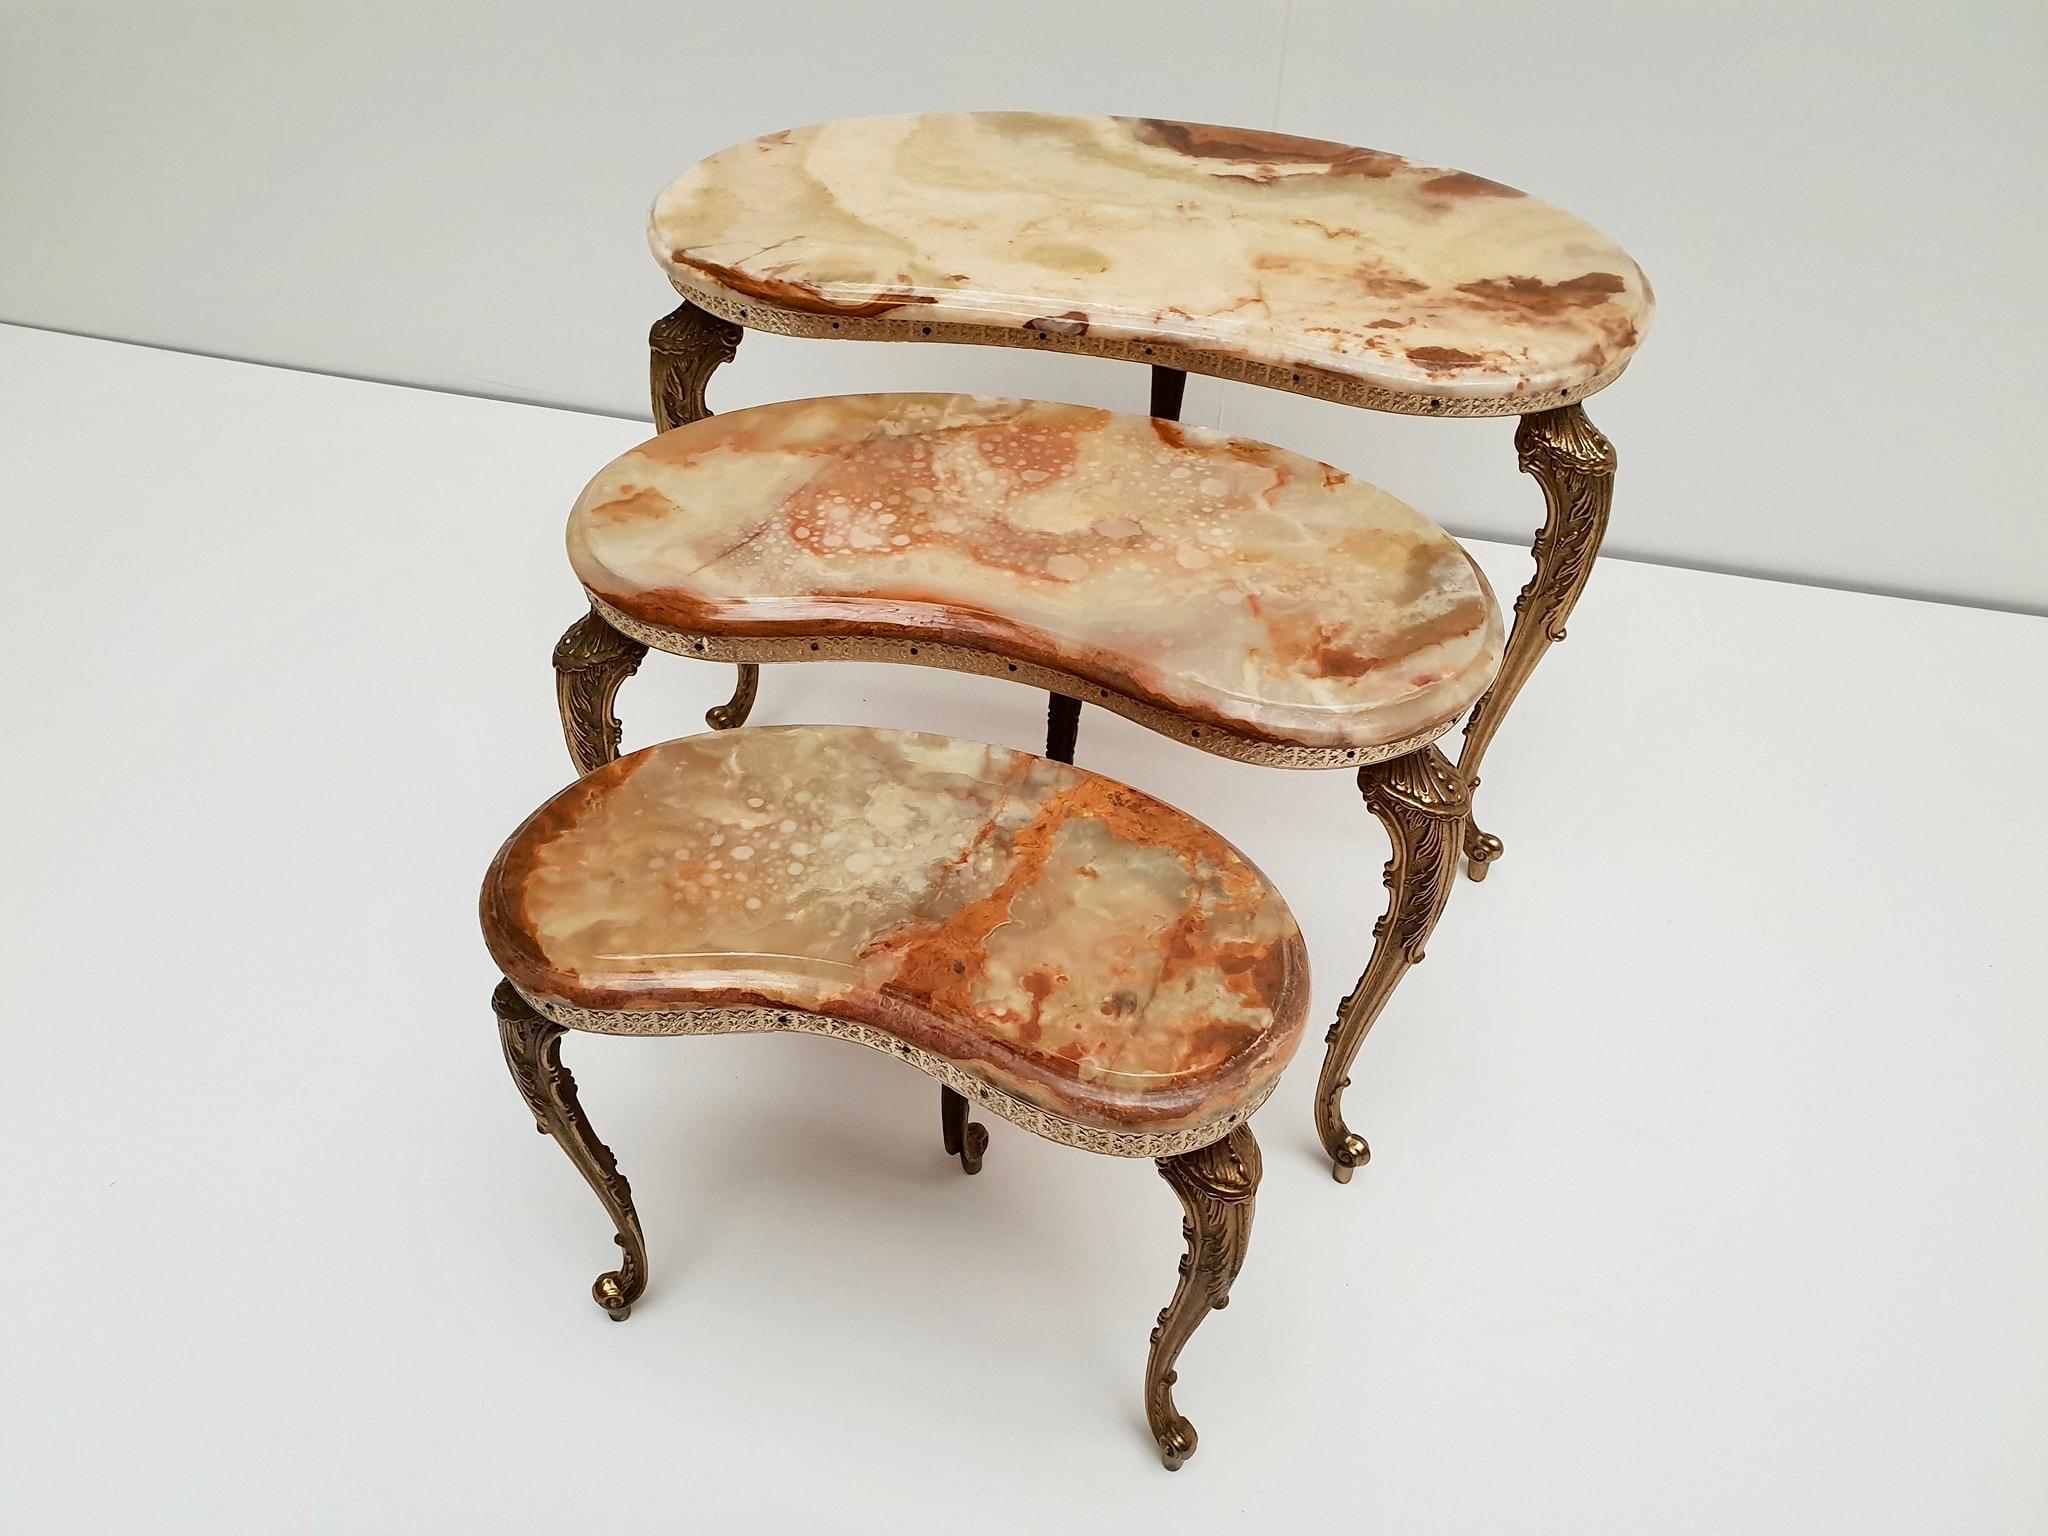 A set of 3 vintage Italian marble nesting tables with polished brass frame.
Measures: Height 43 - 38 - 34 cm. 
Width 62 - 47 - 36 cm. 
Depth 35 - 30 - 20 cm.